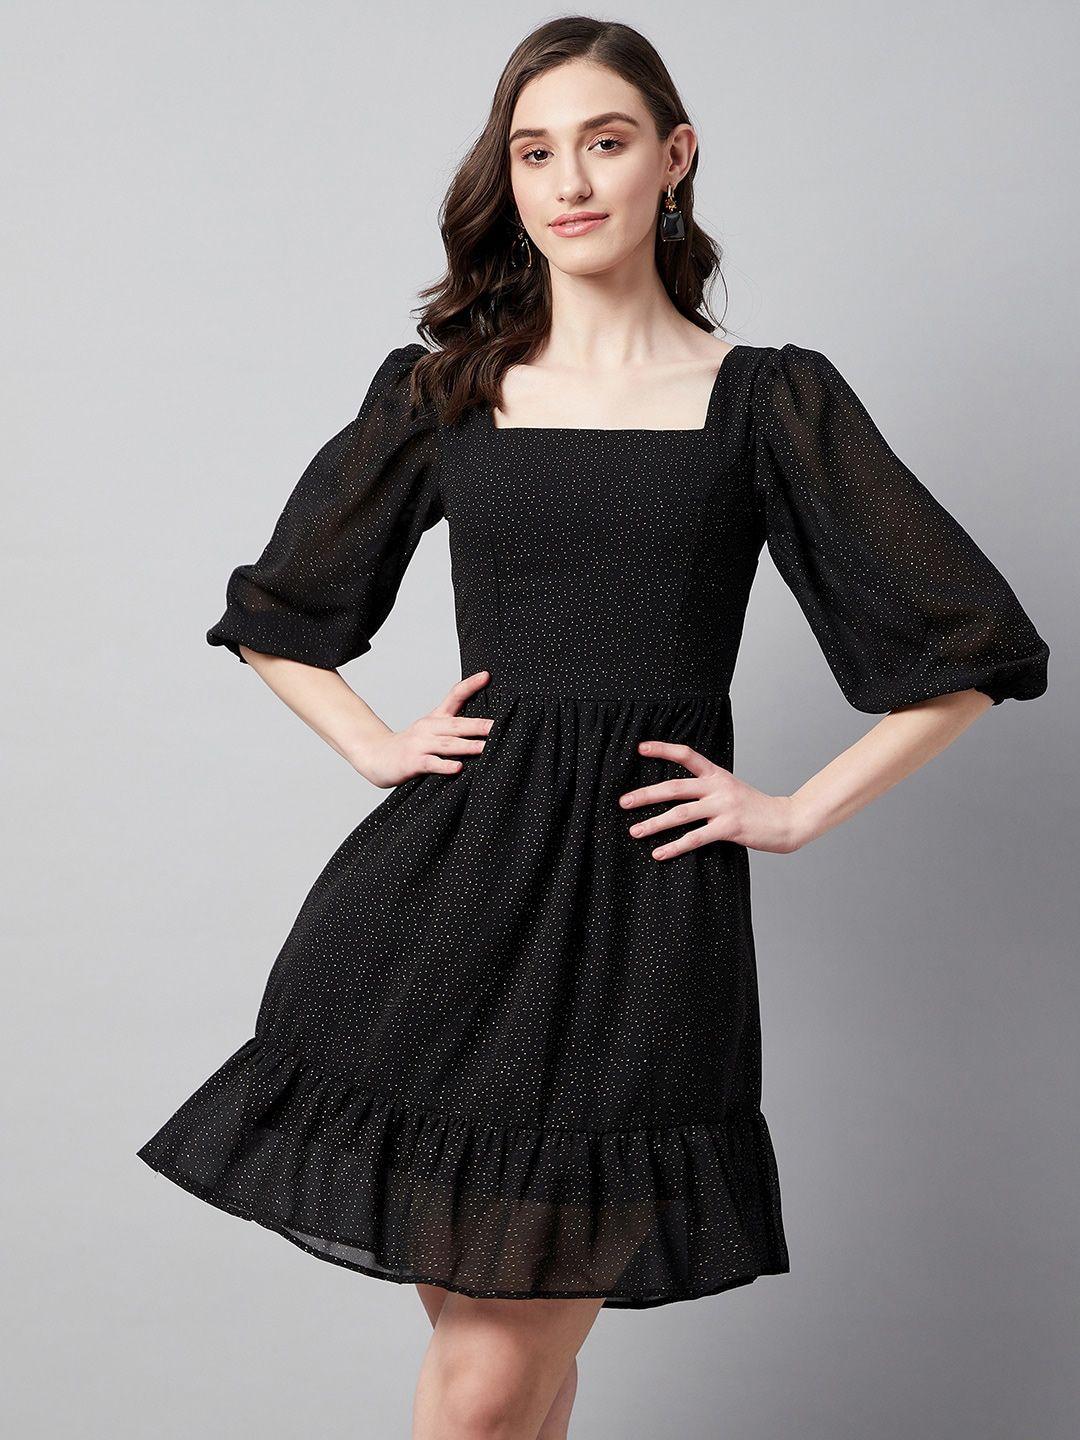 marie claire georgette dress